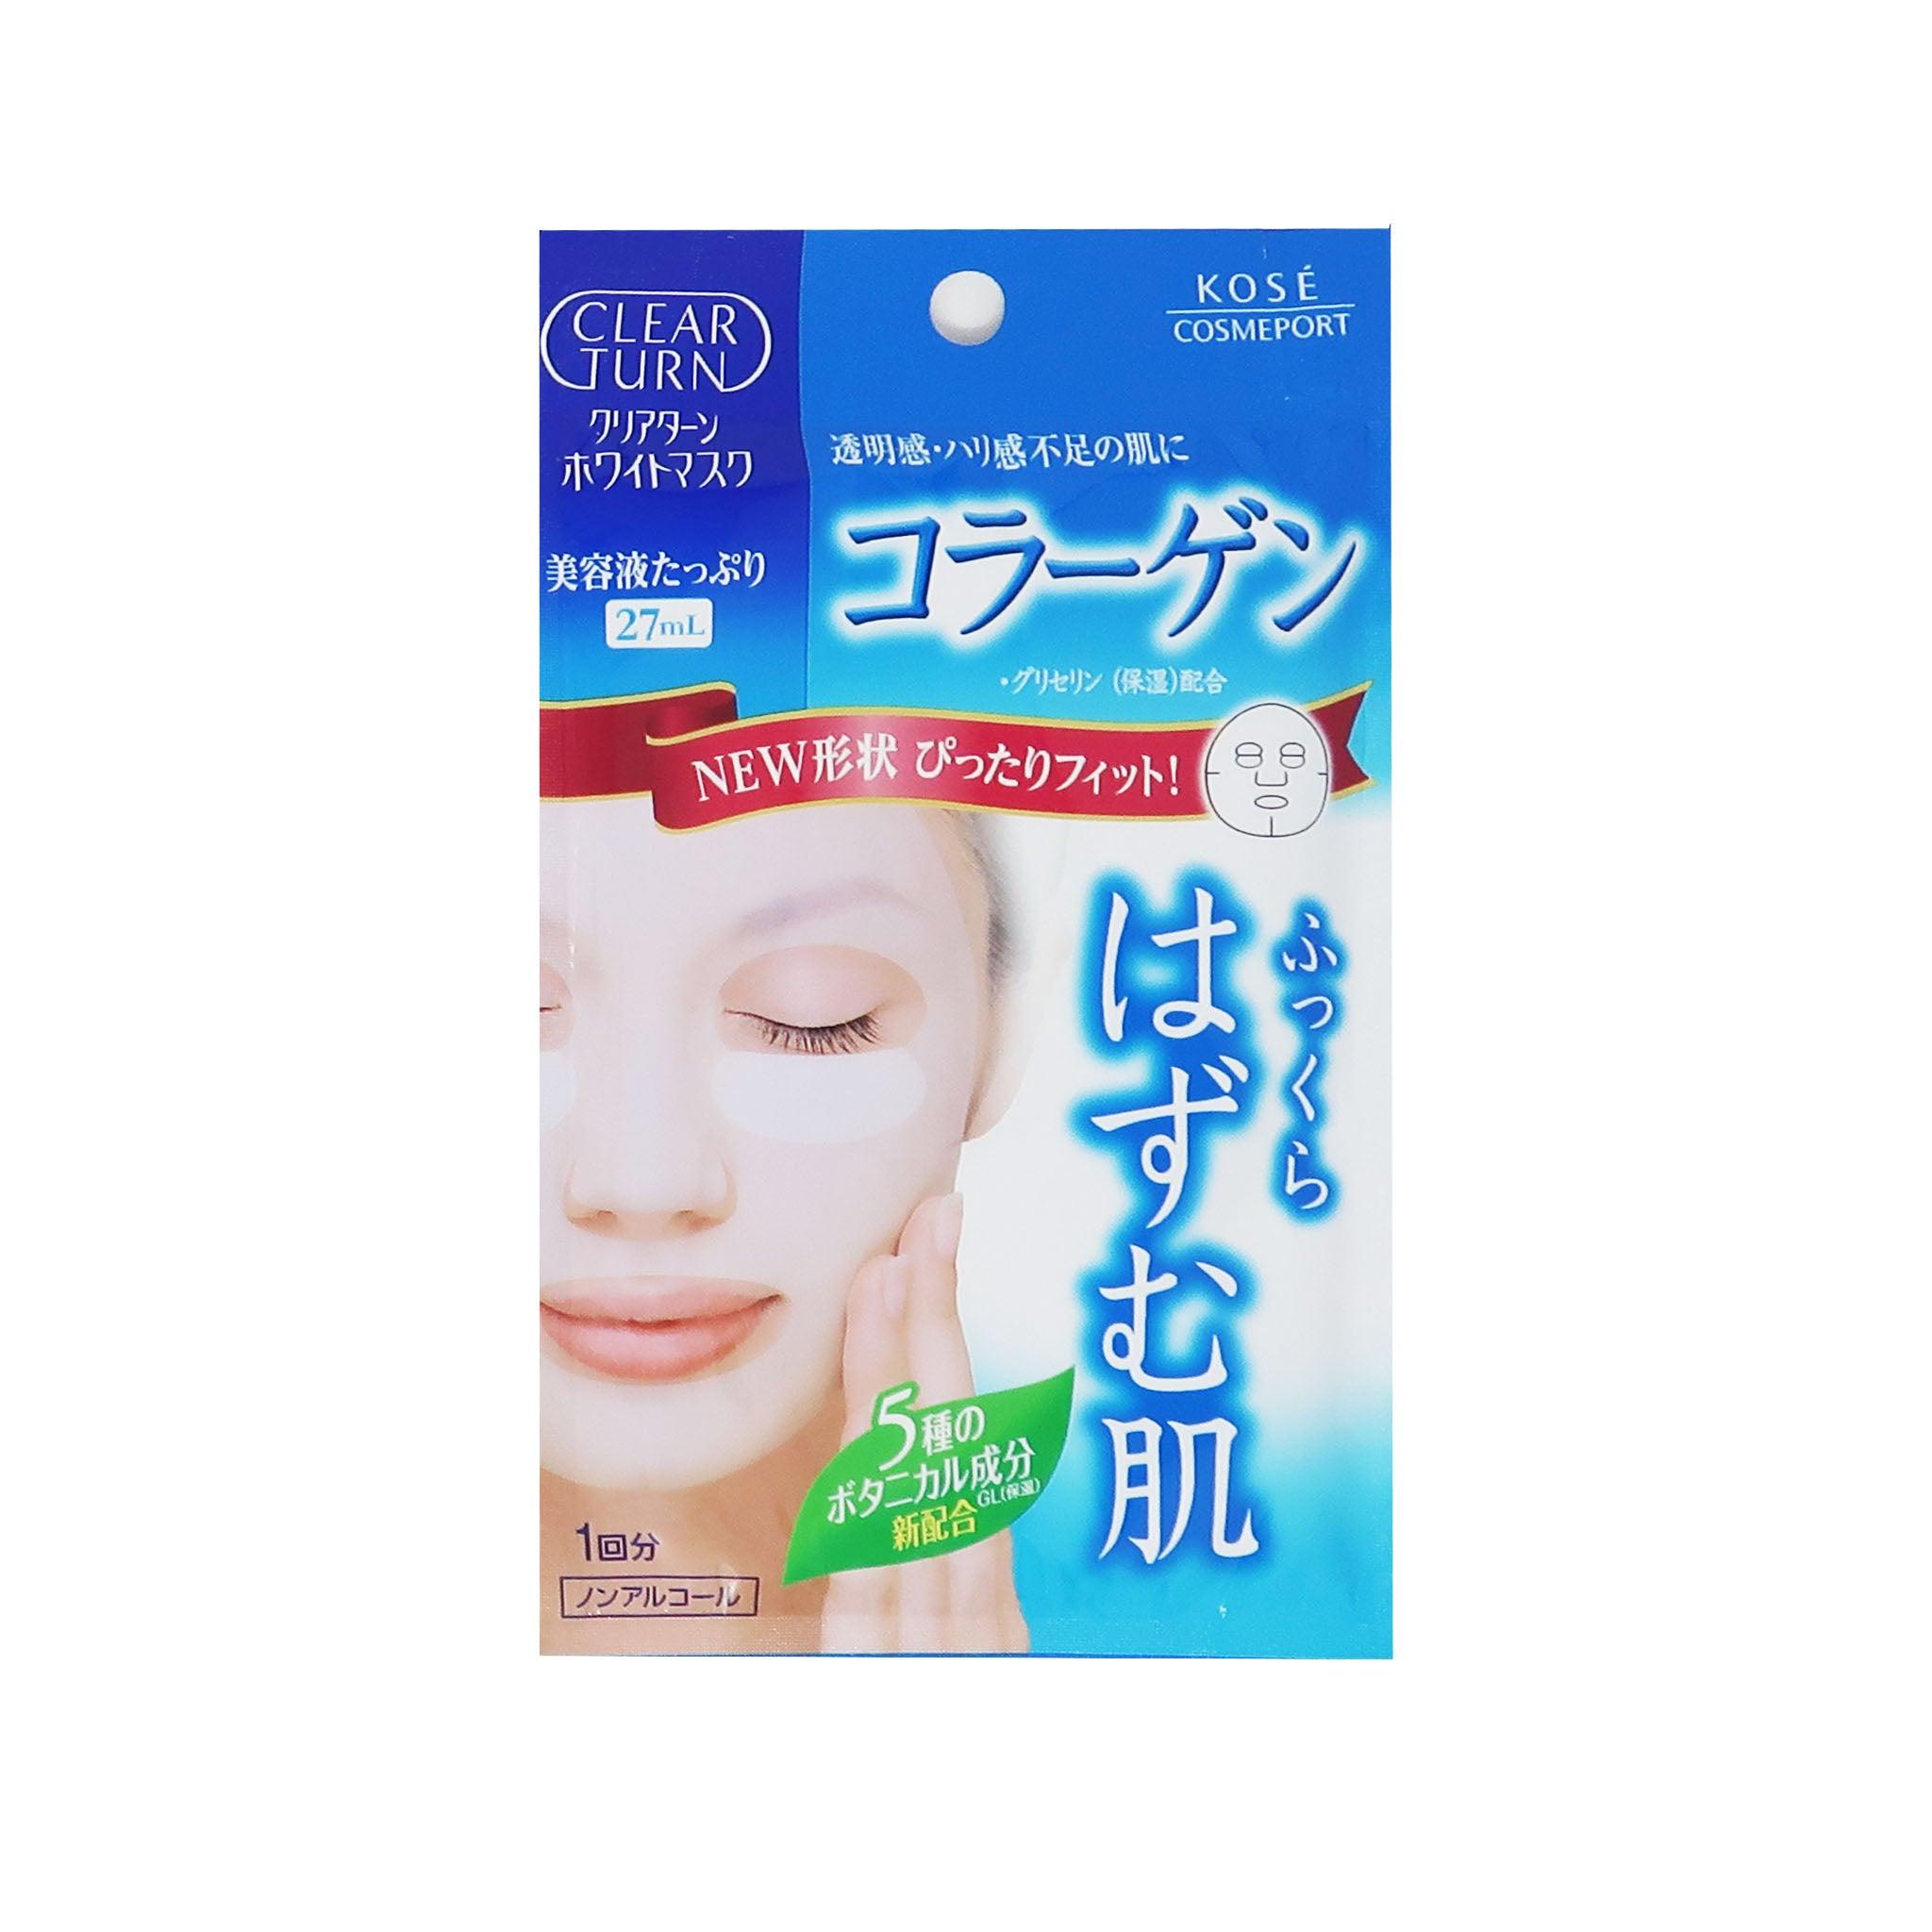 KOSE COSMEPORT Clear Turn White Mask - Collagen [1PC]